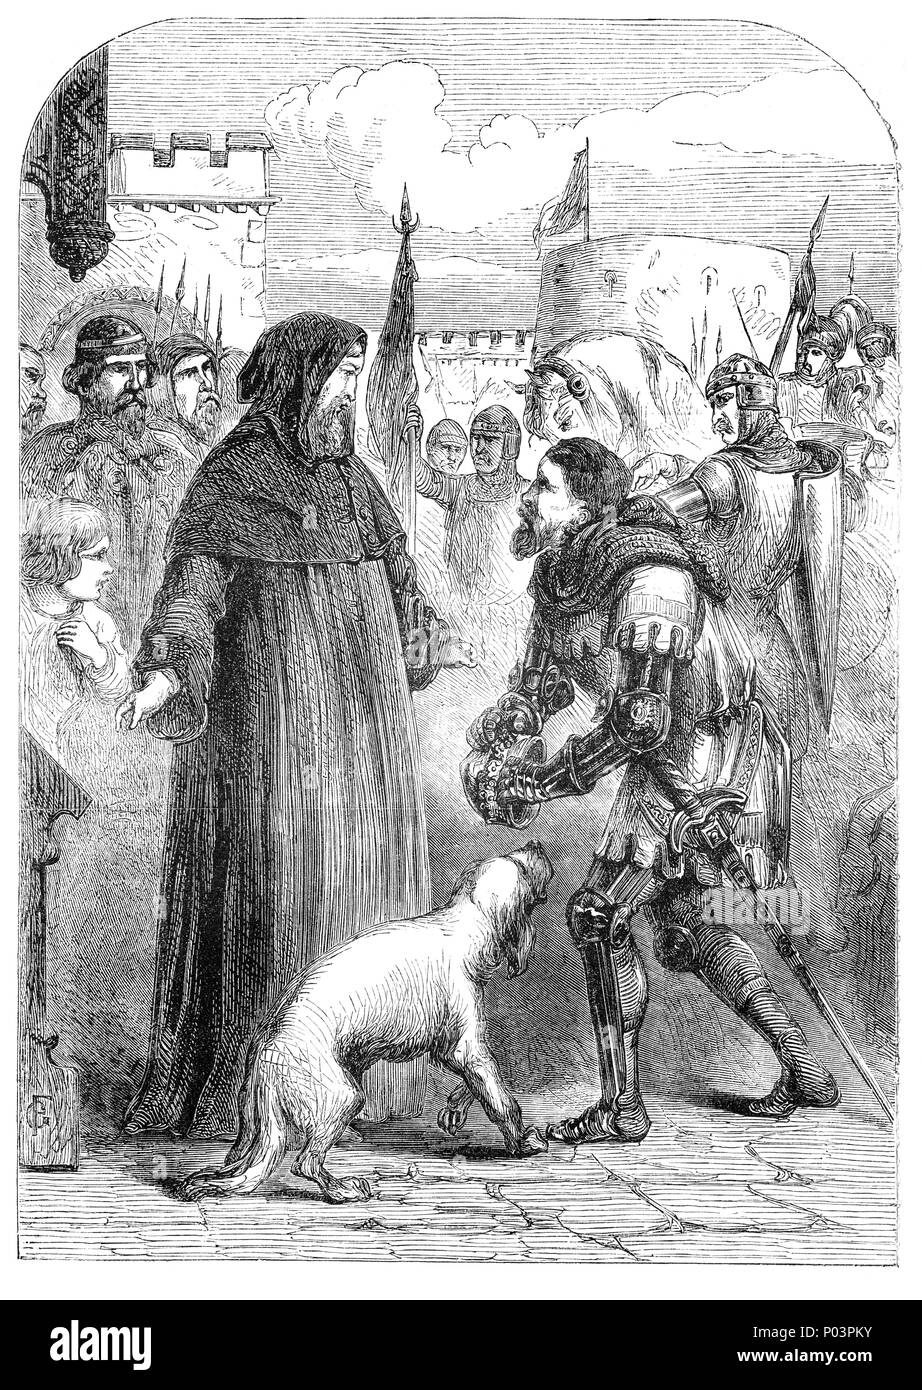 King Richard II meeting Henry Bolingbroke, Earl of Derby in Flint Castle in North Wales. In 1397 Richard II exiled his cousin Henry Bolingbroke, heir to a vast Lancastrian inheritance. When Bolingbroke's father, John of Gaunt, died in 1399 the King seized his estates, then departed on a military campaign in Ireland. Henry returned from exile to reclaim his lands, but finding little support for Richard and altered his plans to seize the throne. When King Richard landed in Wales he was captured and held in Flint Castle. Following negotiations Richard abdicated on 19 August 1399. Stock Photo